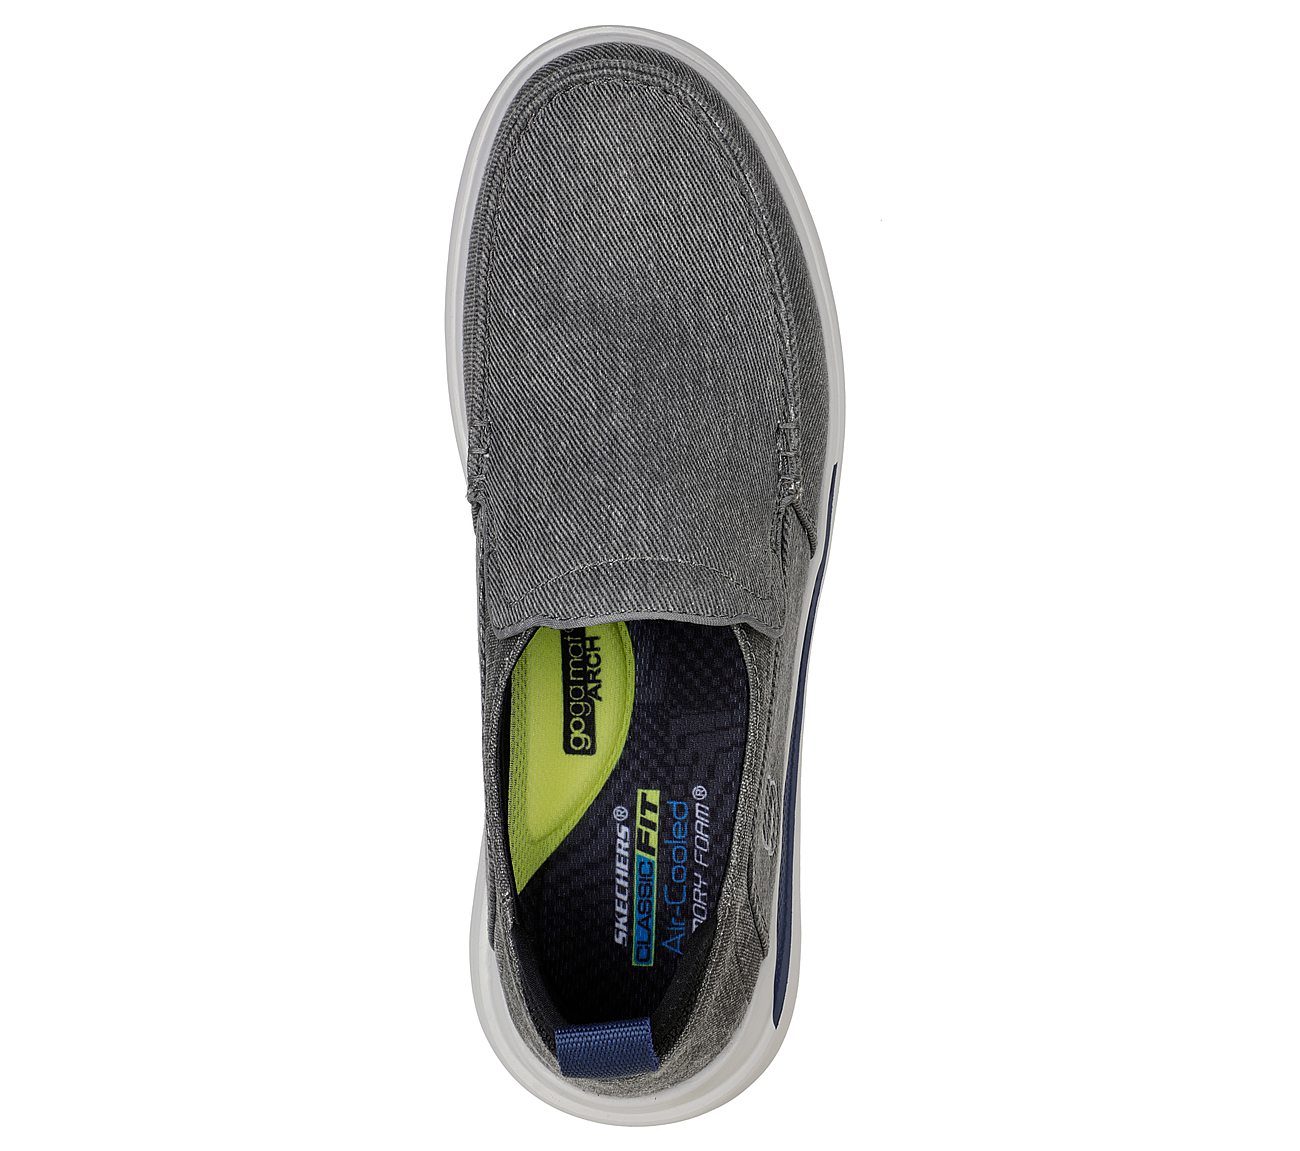 PROVEN - EVERS, CCHARCOAL Footwear Top View